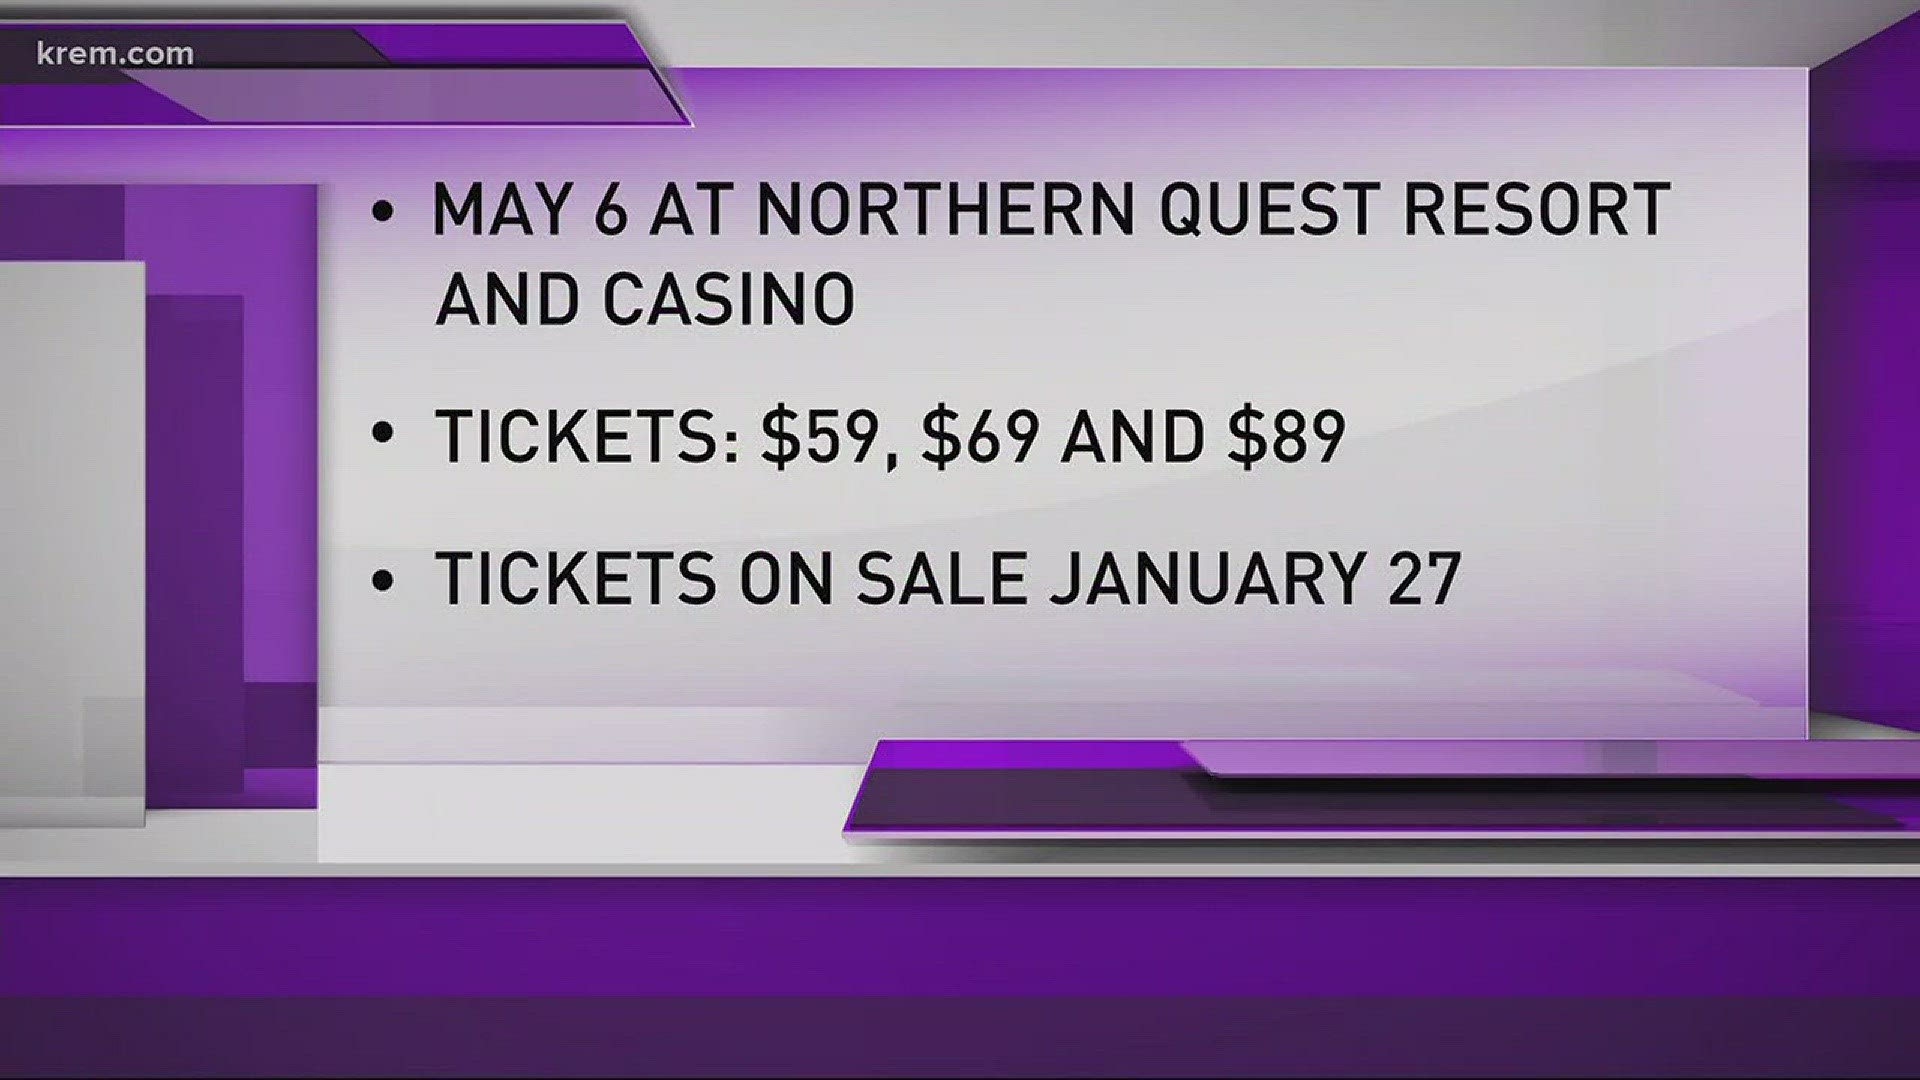 Jay Leno is going to be at the Northern Quest Resort and Casino.